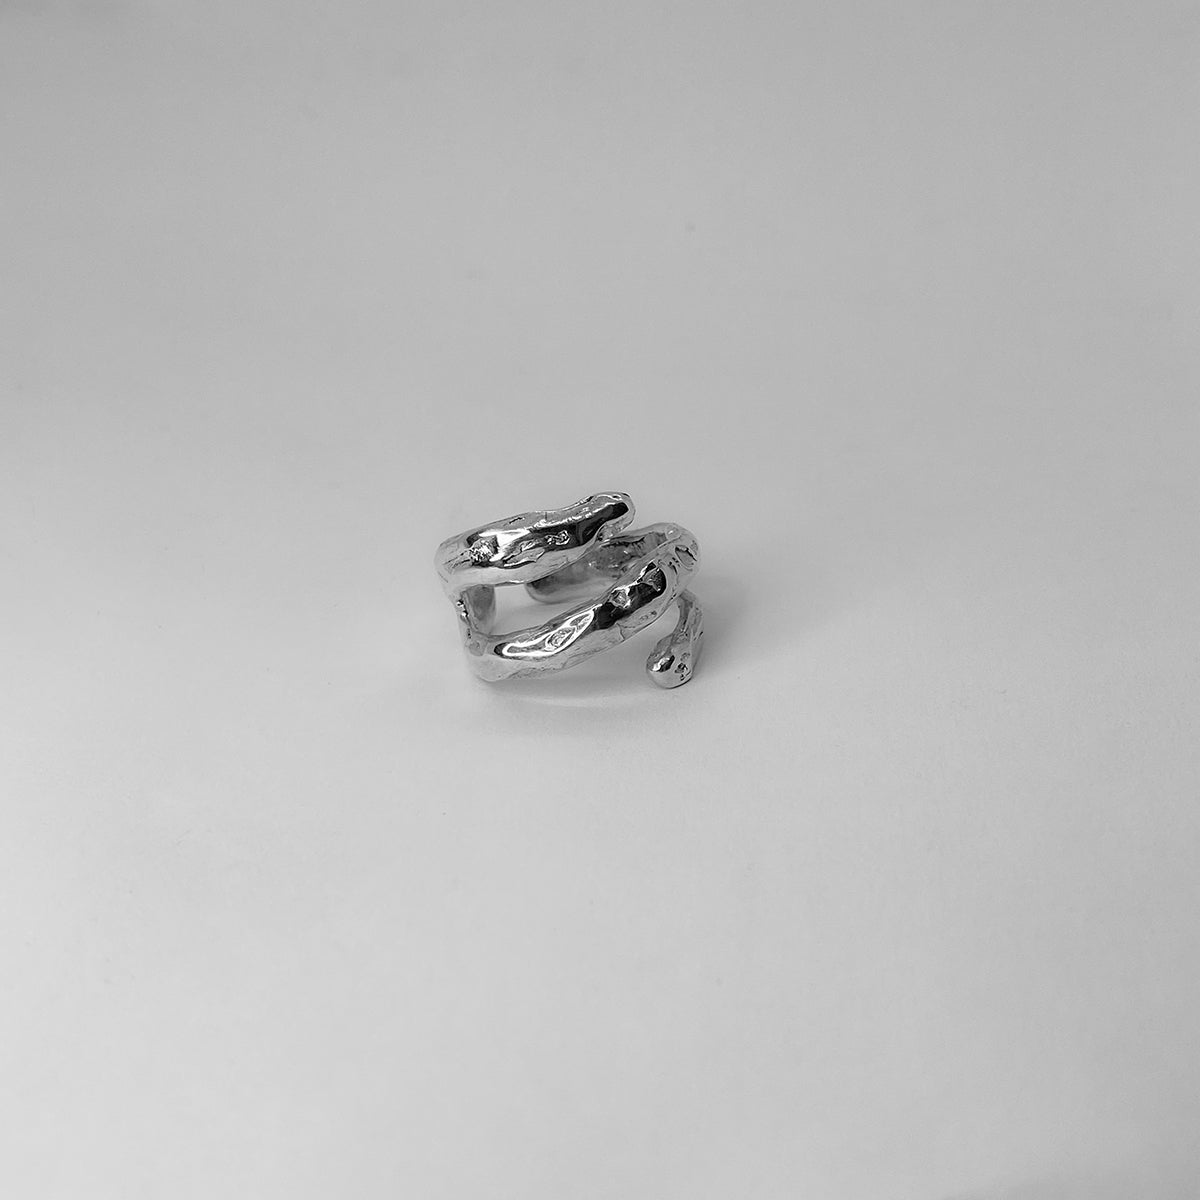 Handmade untreated ring crafted from sterling silver 925.